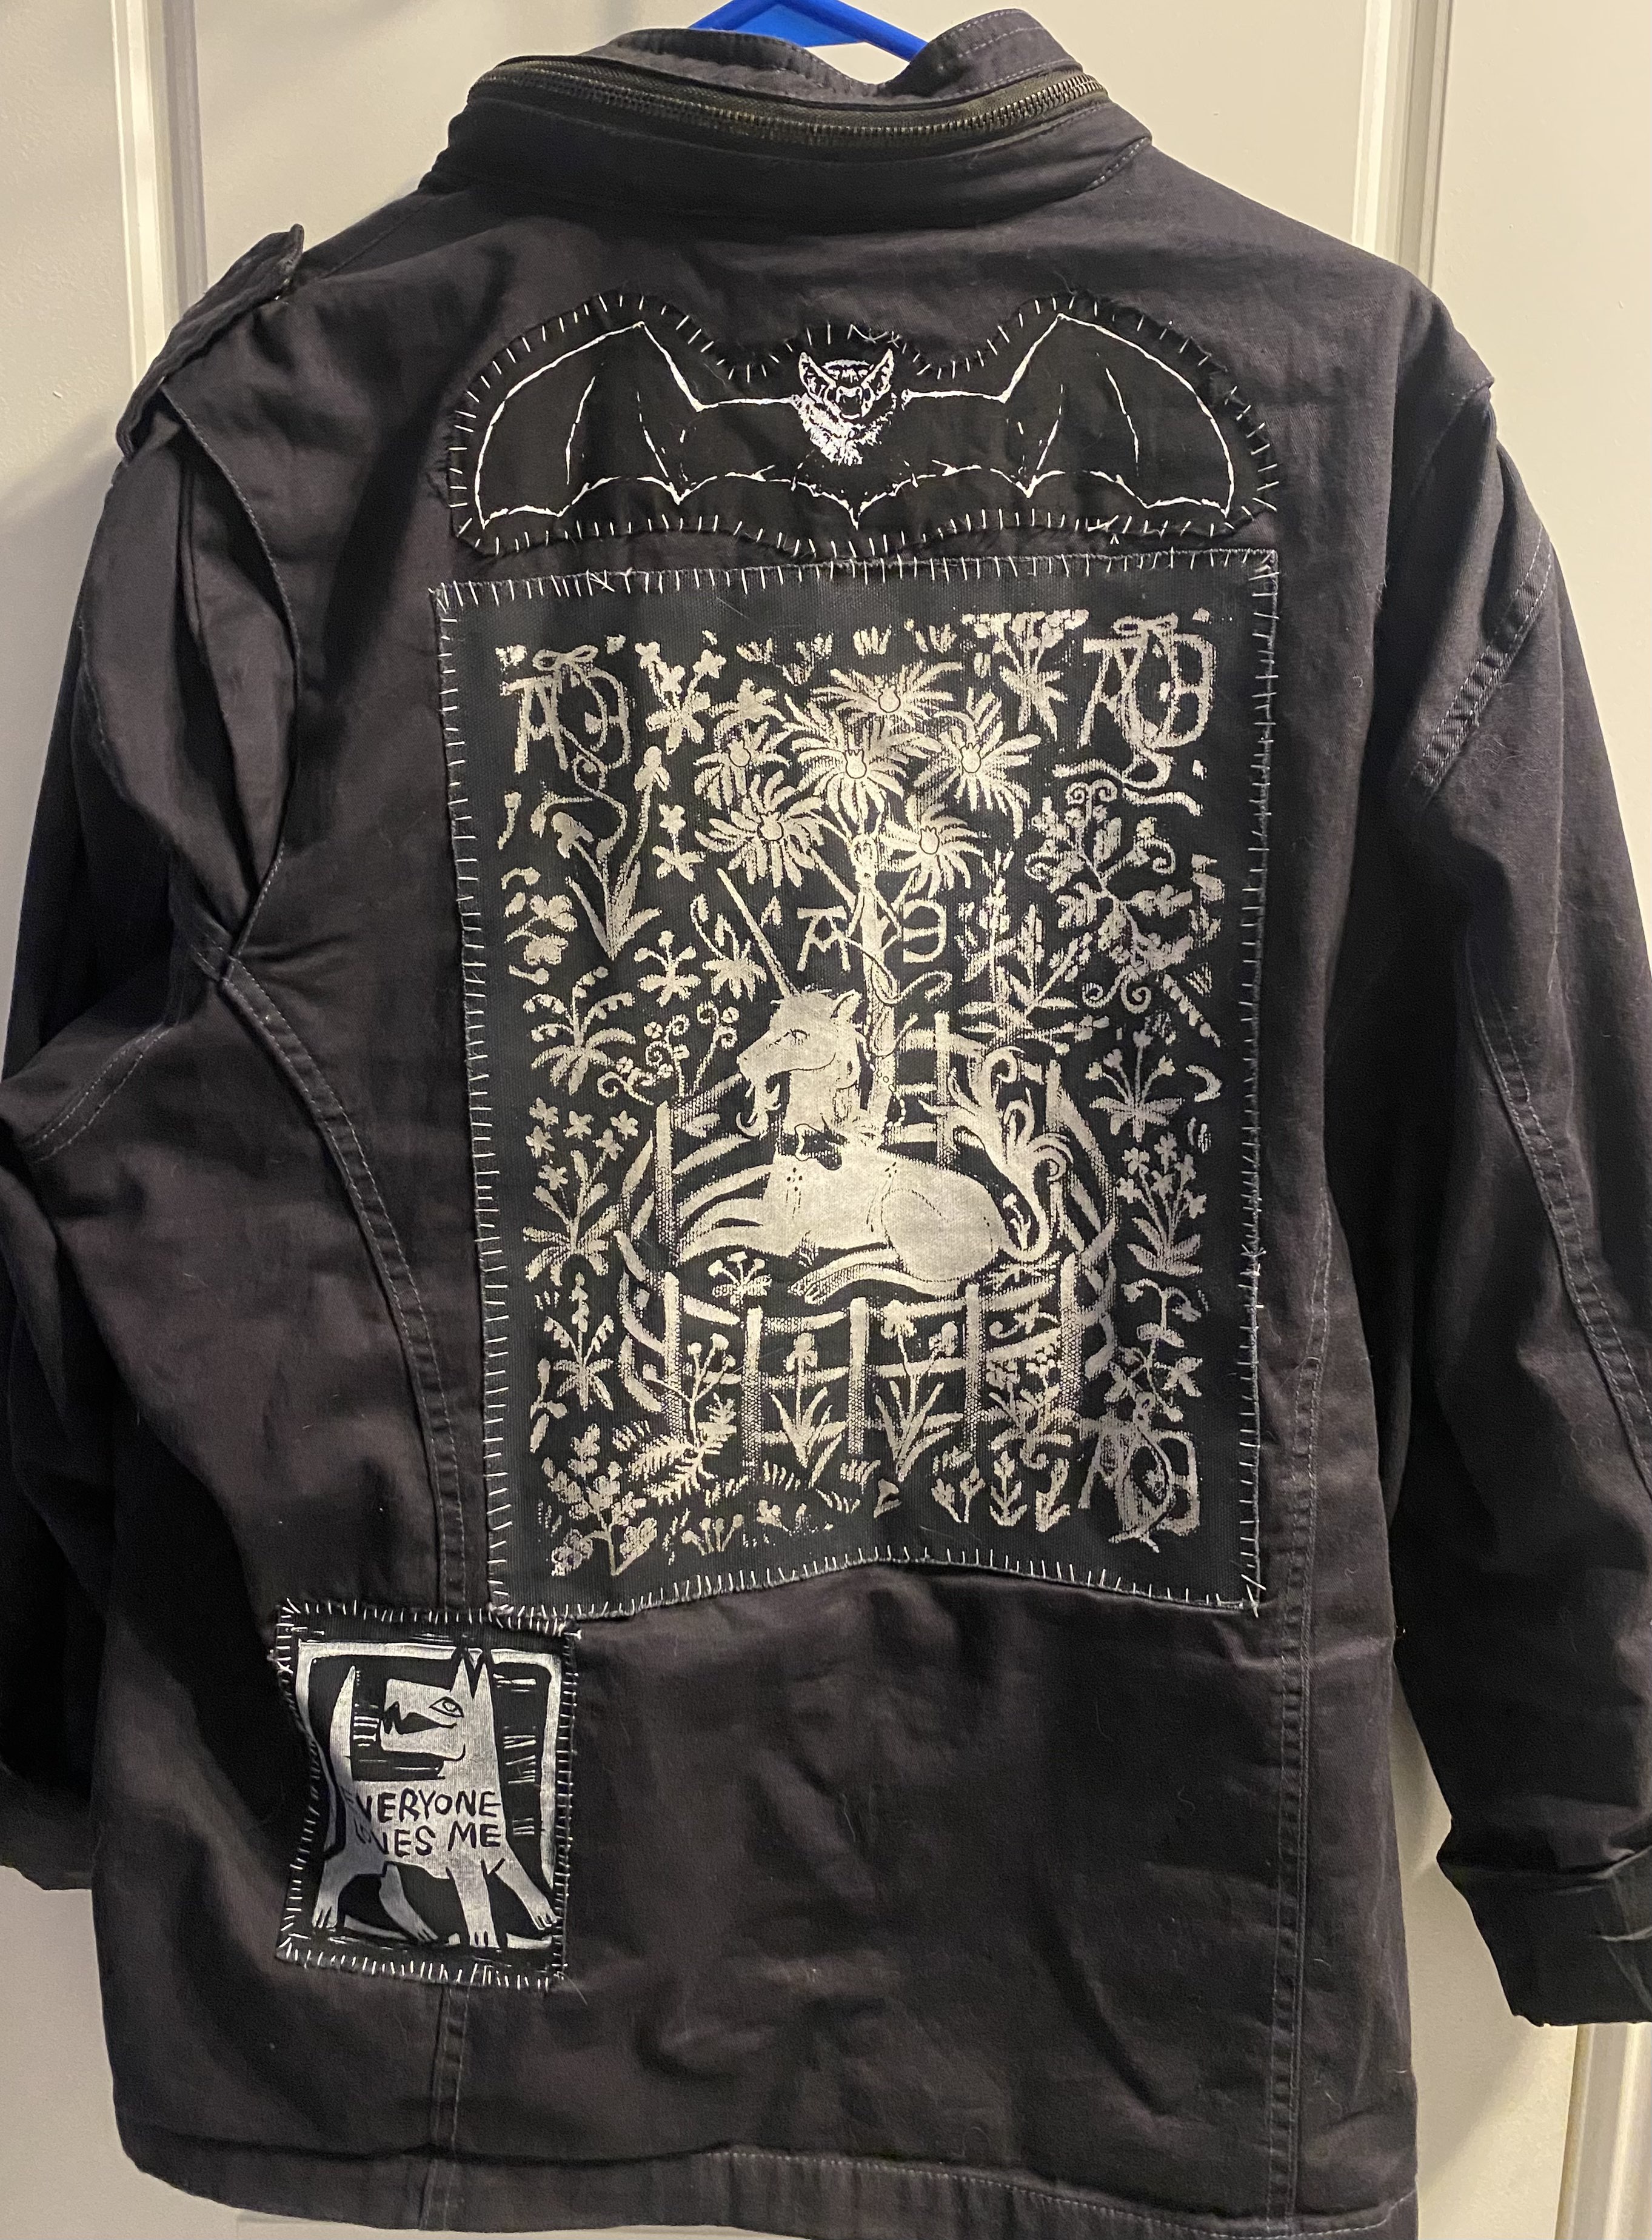 The back of a black jacket with a few hand-sewn patches